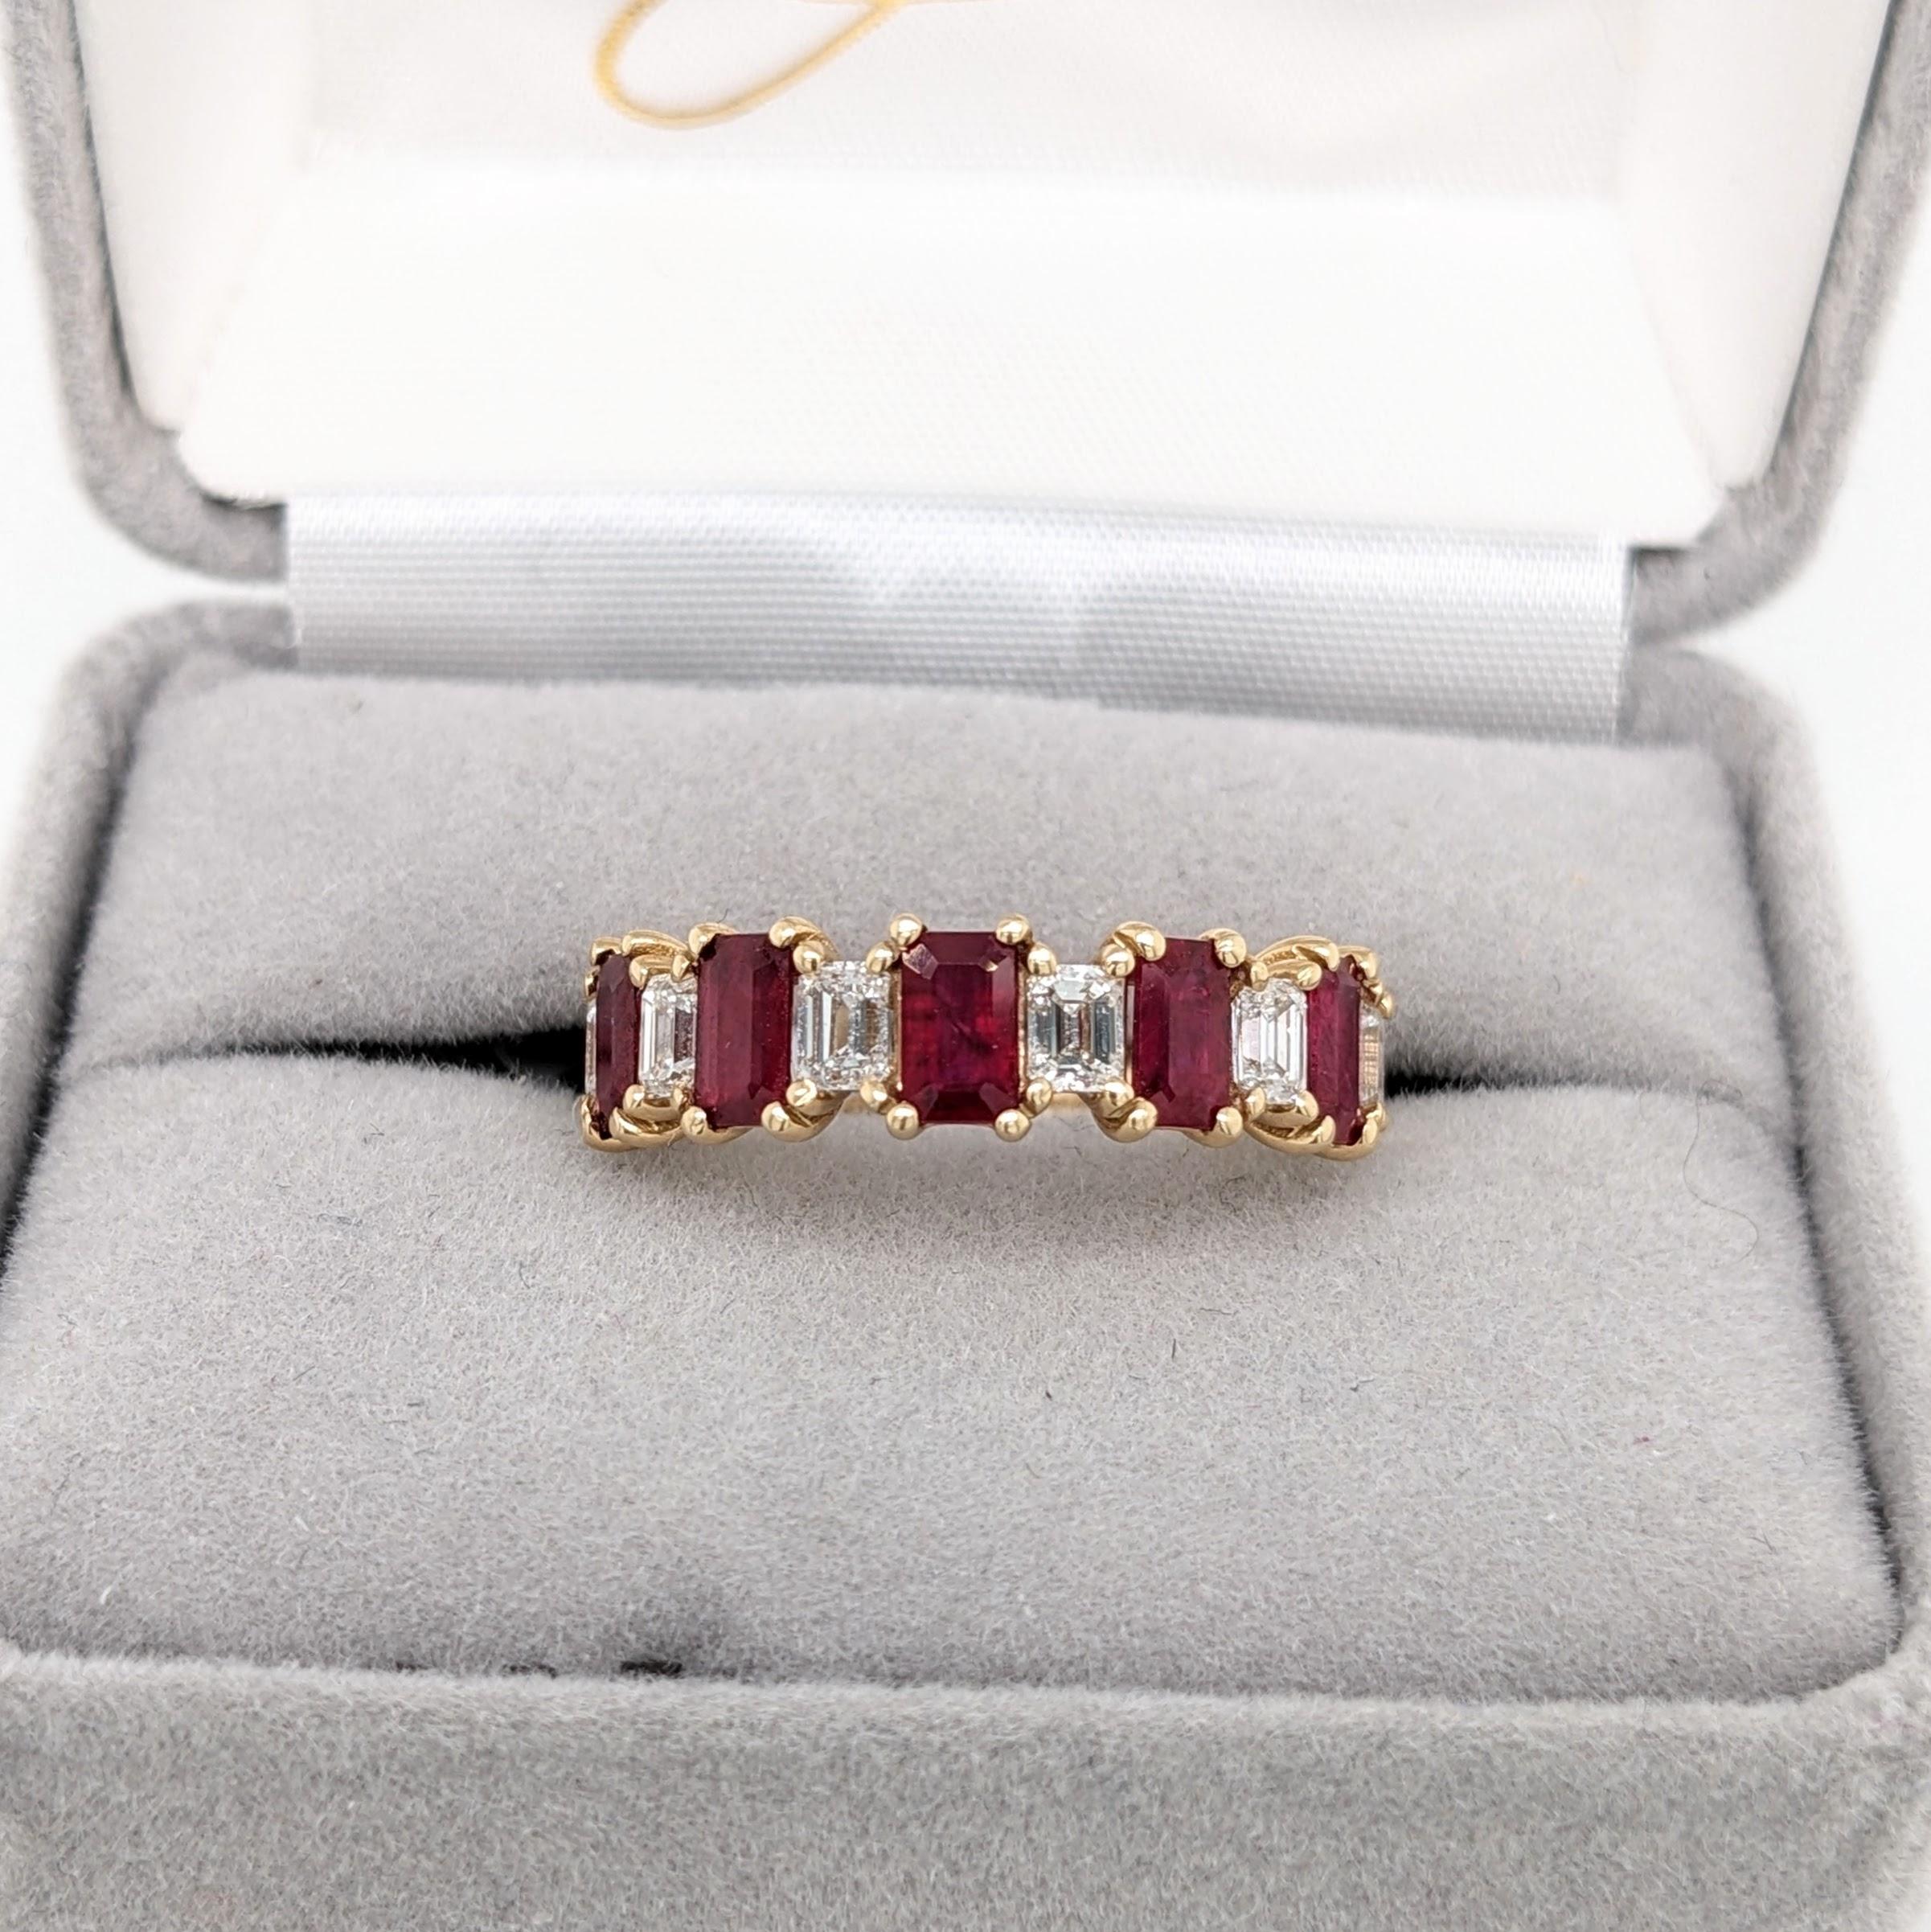 1.56ct Ruby Ring w Baguette Diamond Accents in 14K Gold Emerald Cut Rubies For Sale 1